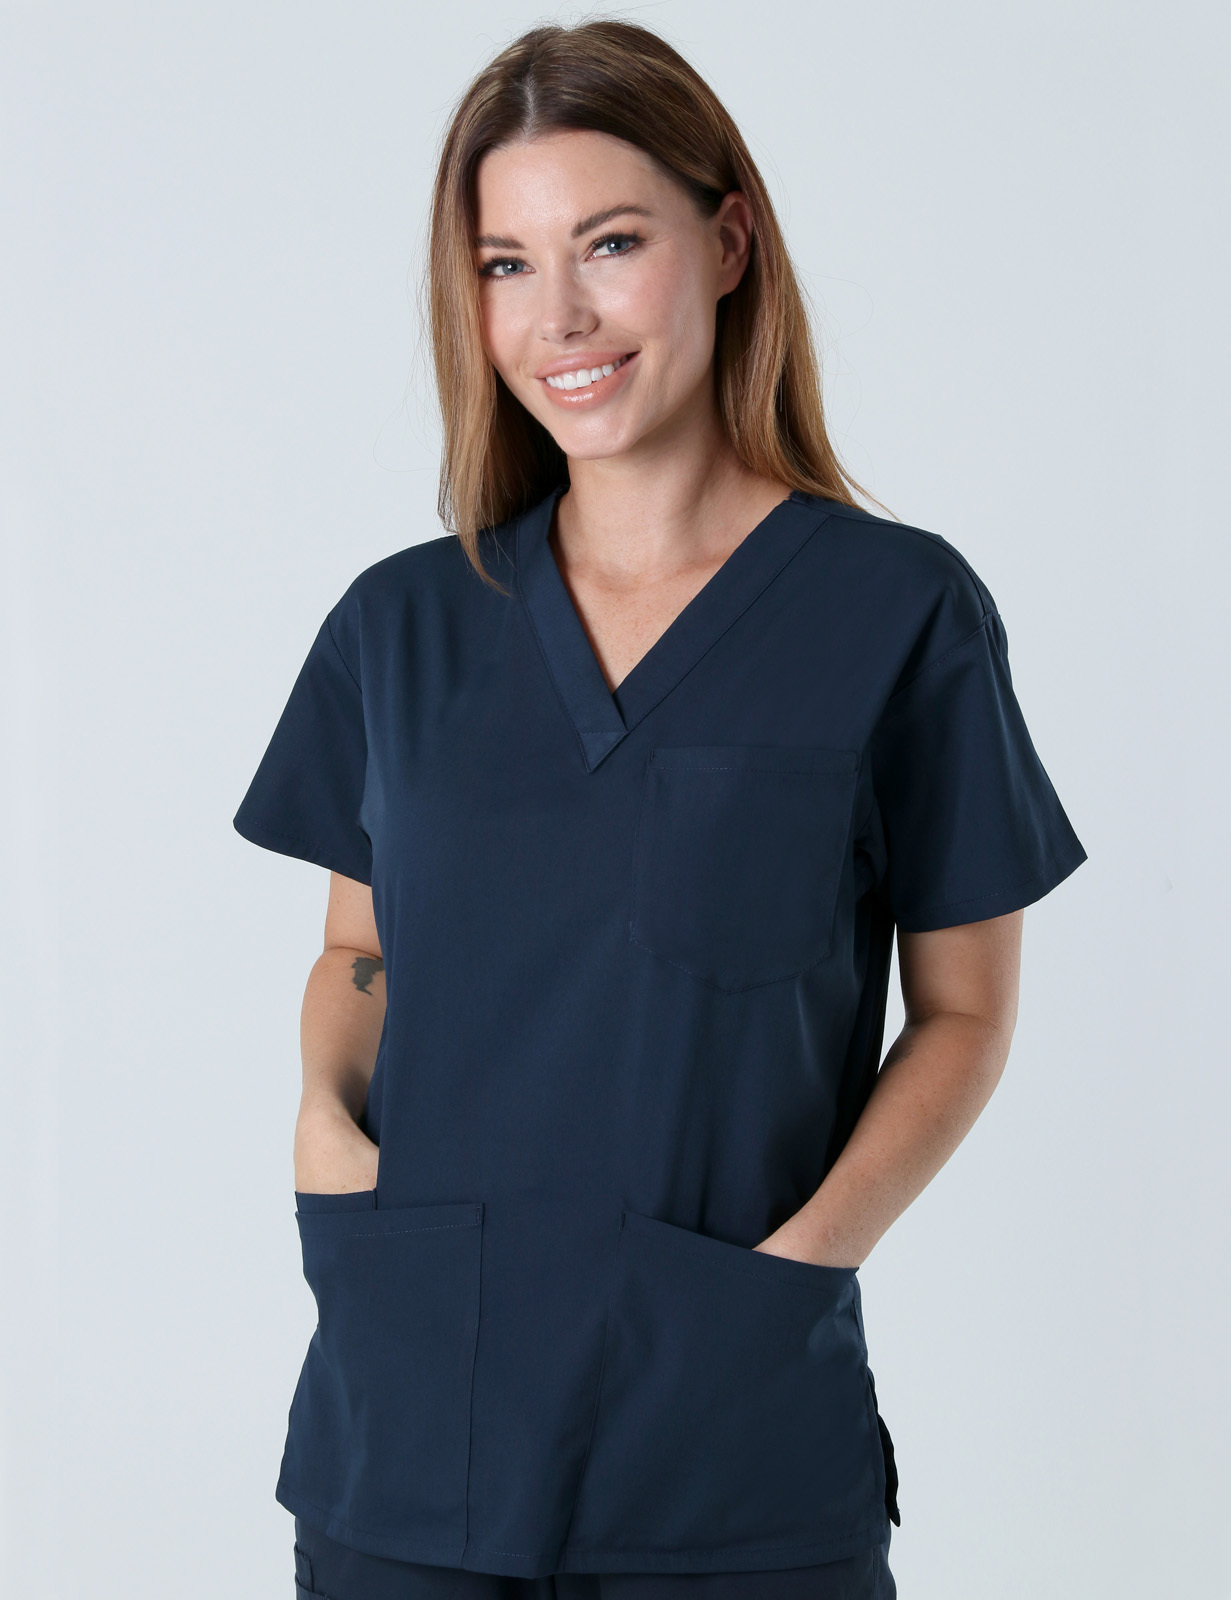 The Alfred Hospital - ICU (4 Pocket Scrub Top and Cargo Pants in Navy incl Logos)